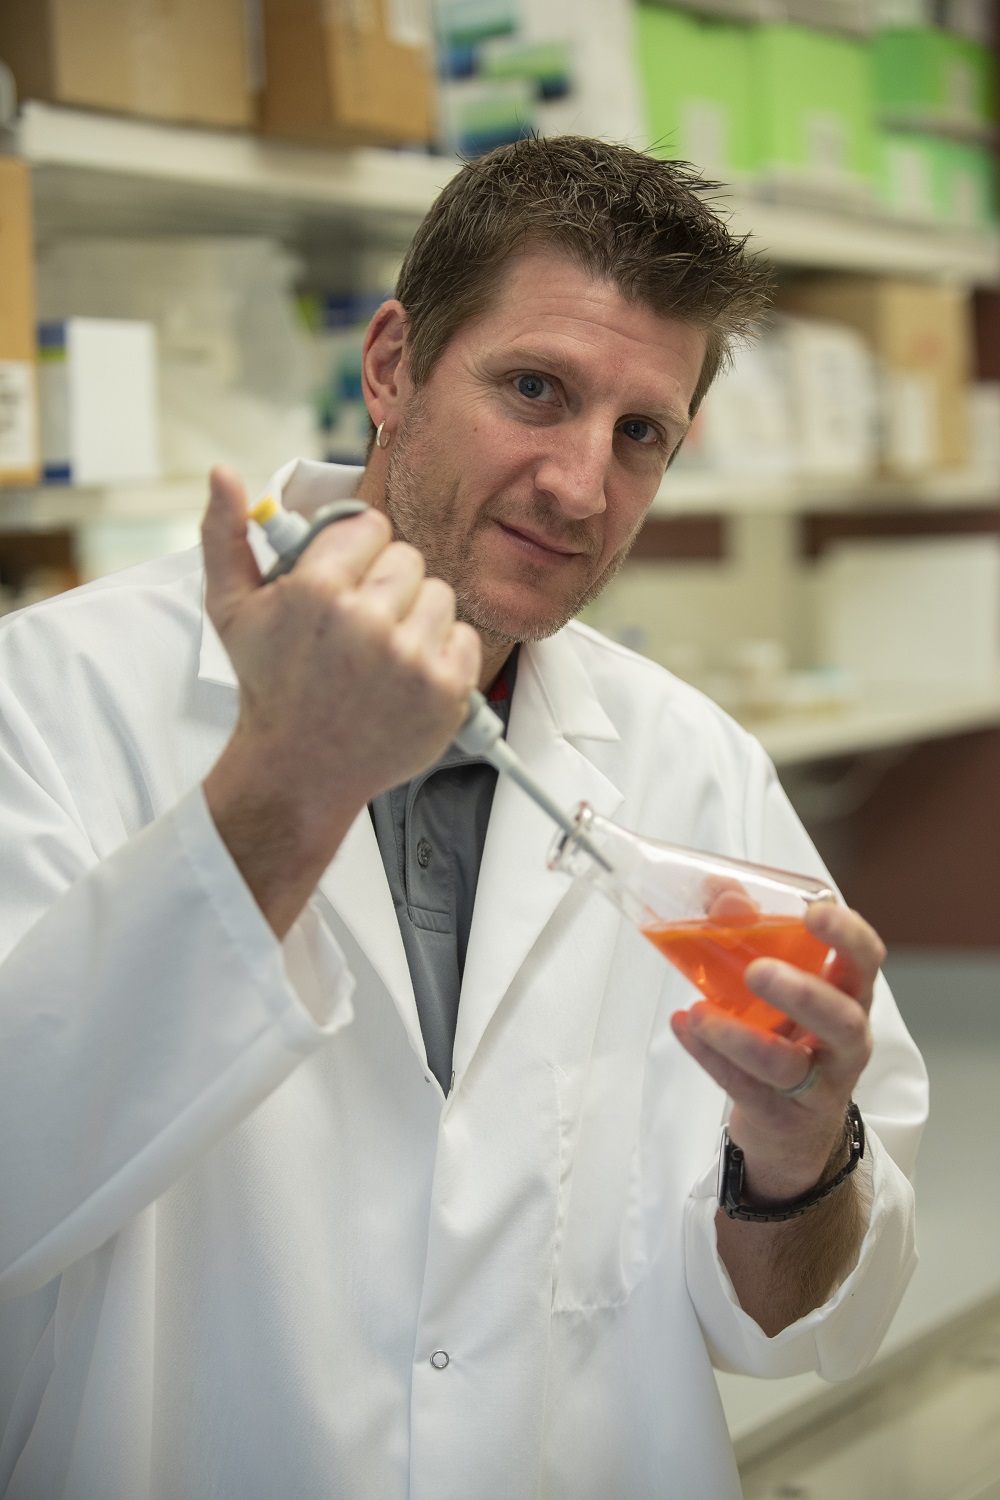 UofL cancer researcher gains NIH funding to study Alzheimer’s disease